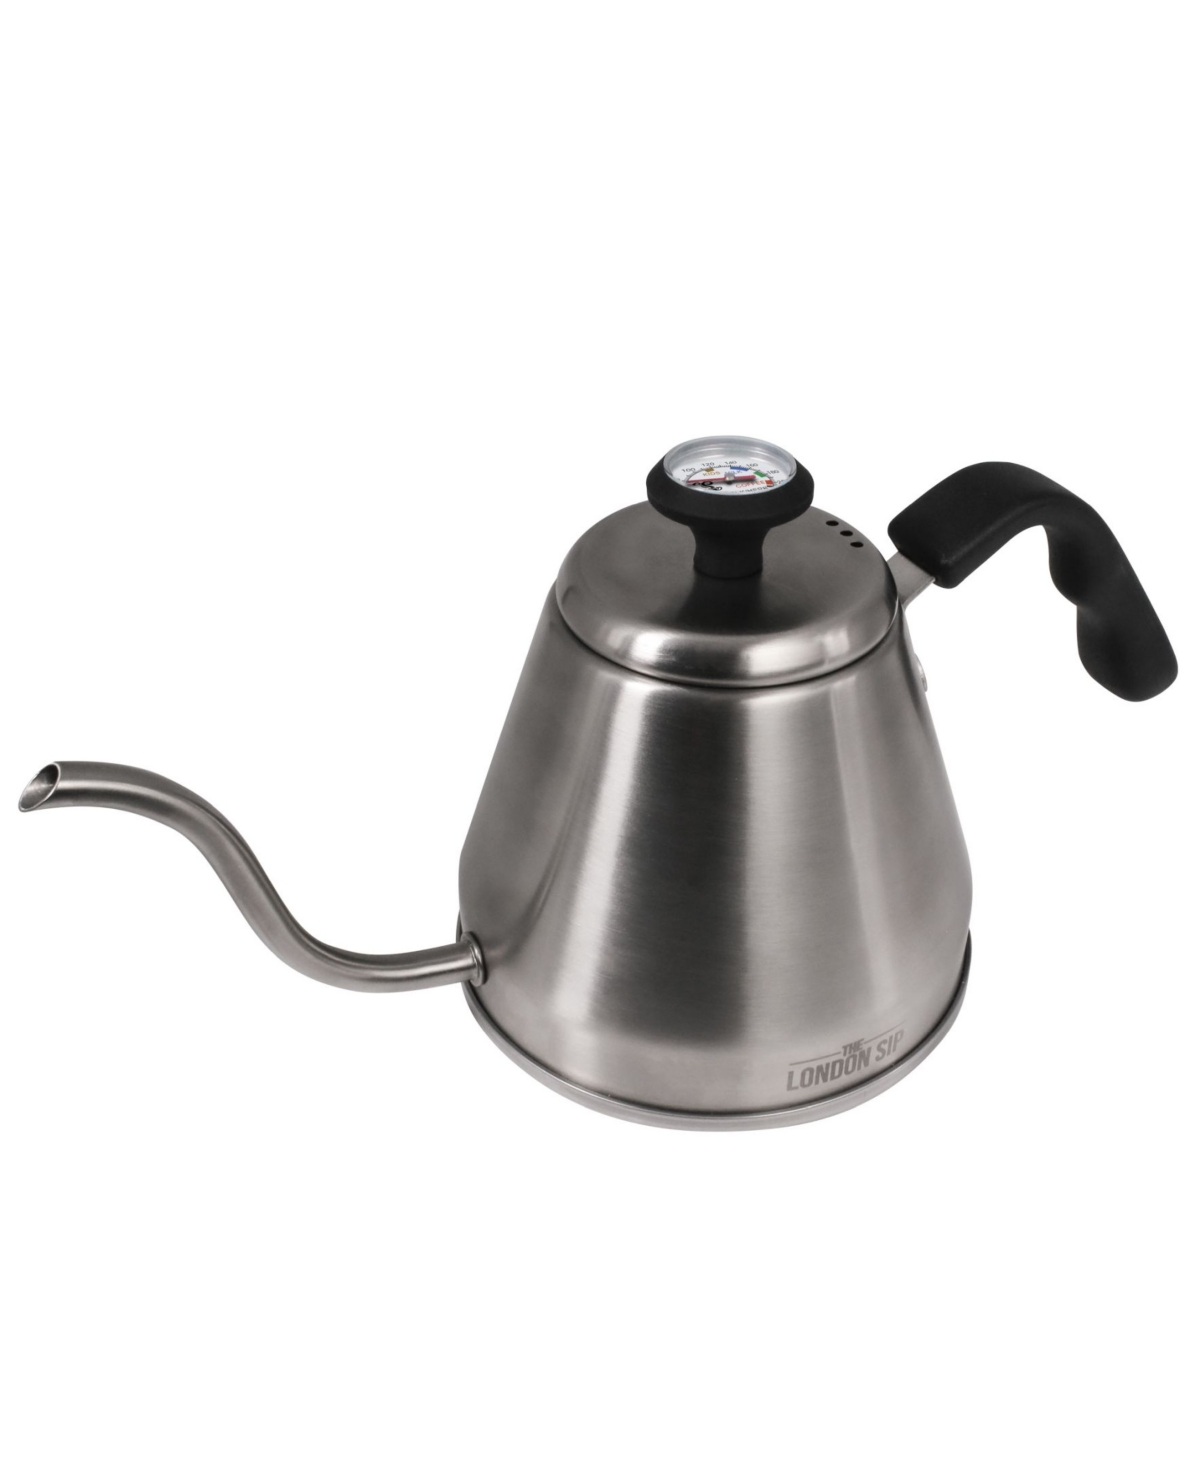 London Sip Stainless Steel Kettle With Beverage Thermometer, 1.2 Liter In Silver